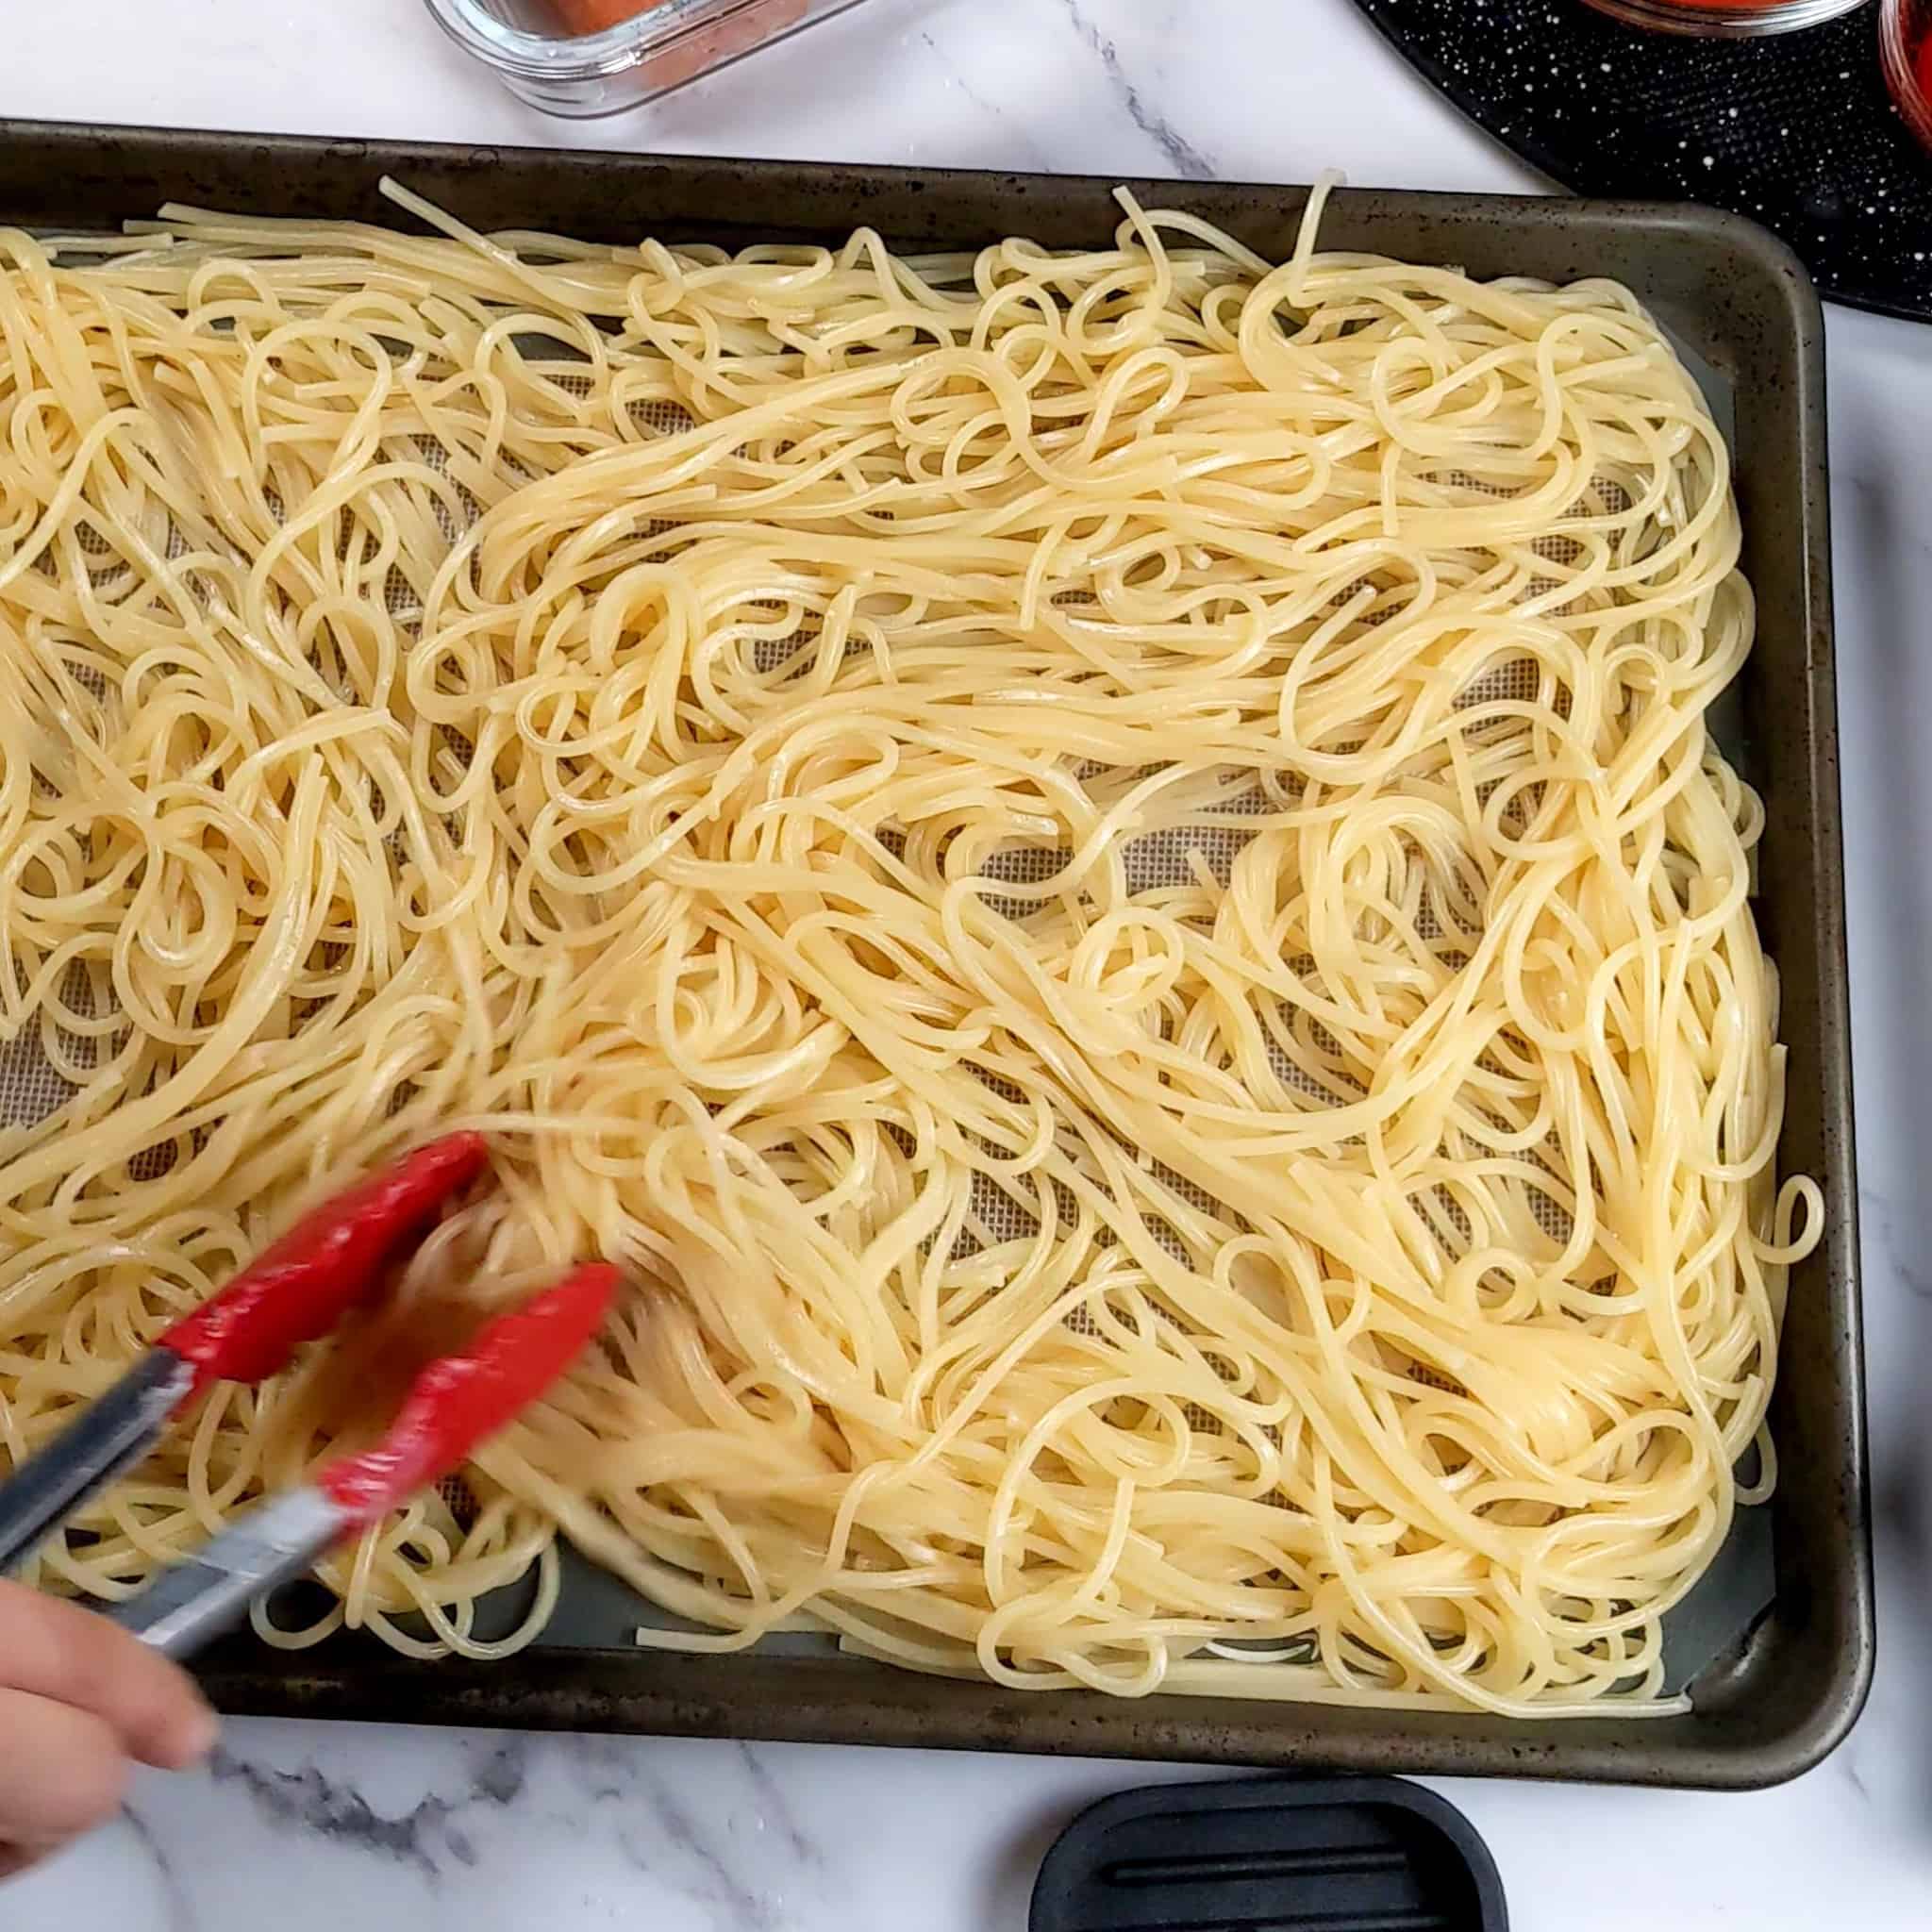 cooked spaghetti on a sheet pan lined with a silicone liner being spread out with a pair of kitchenaid silicone tipped tongs